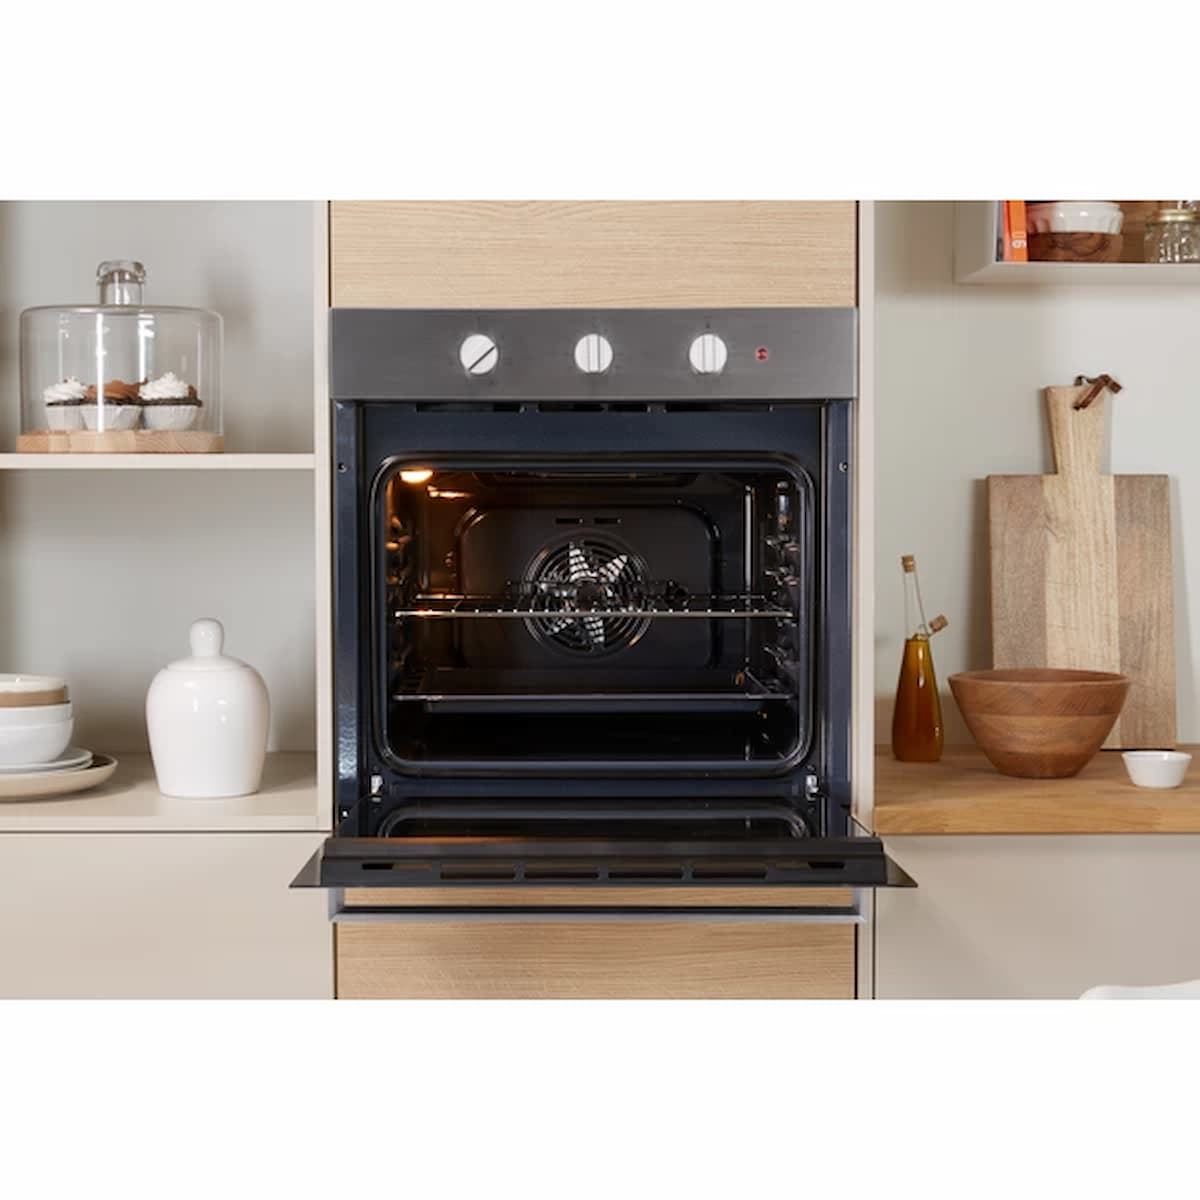 Built in electric oven-IFW6330IX